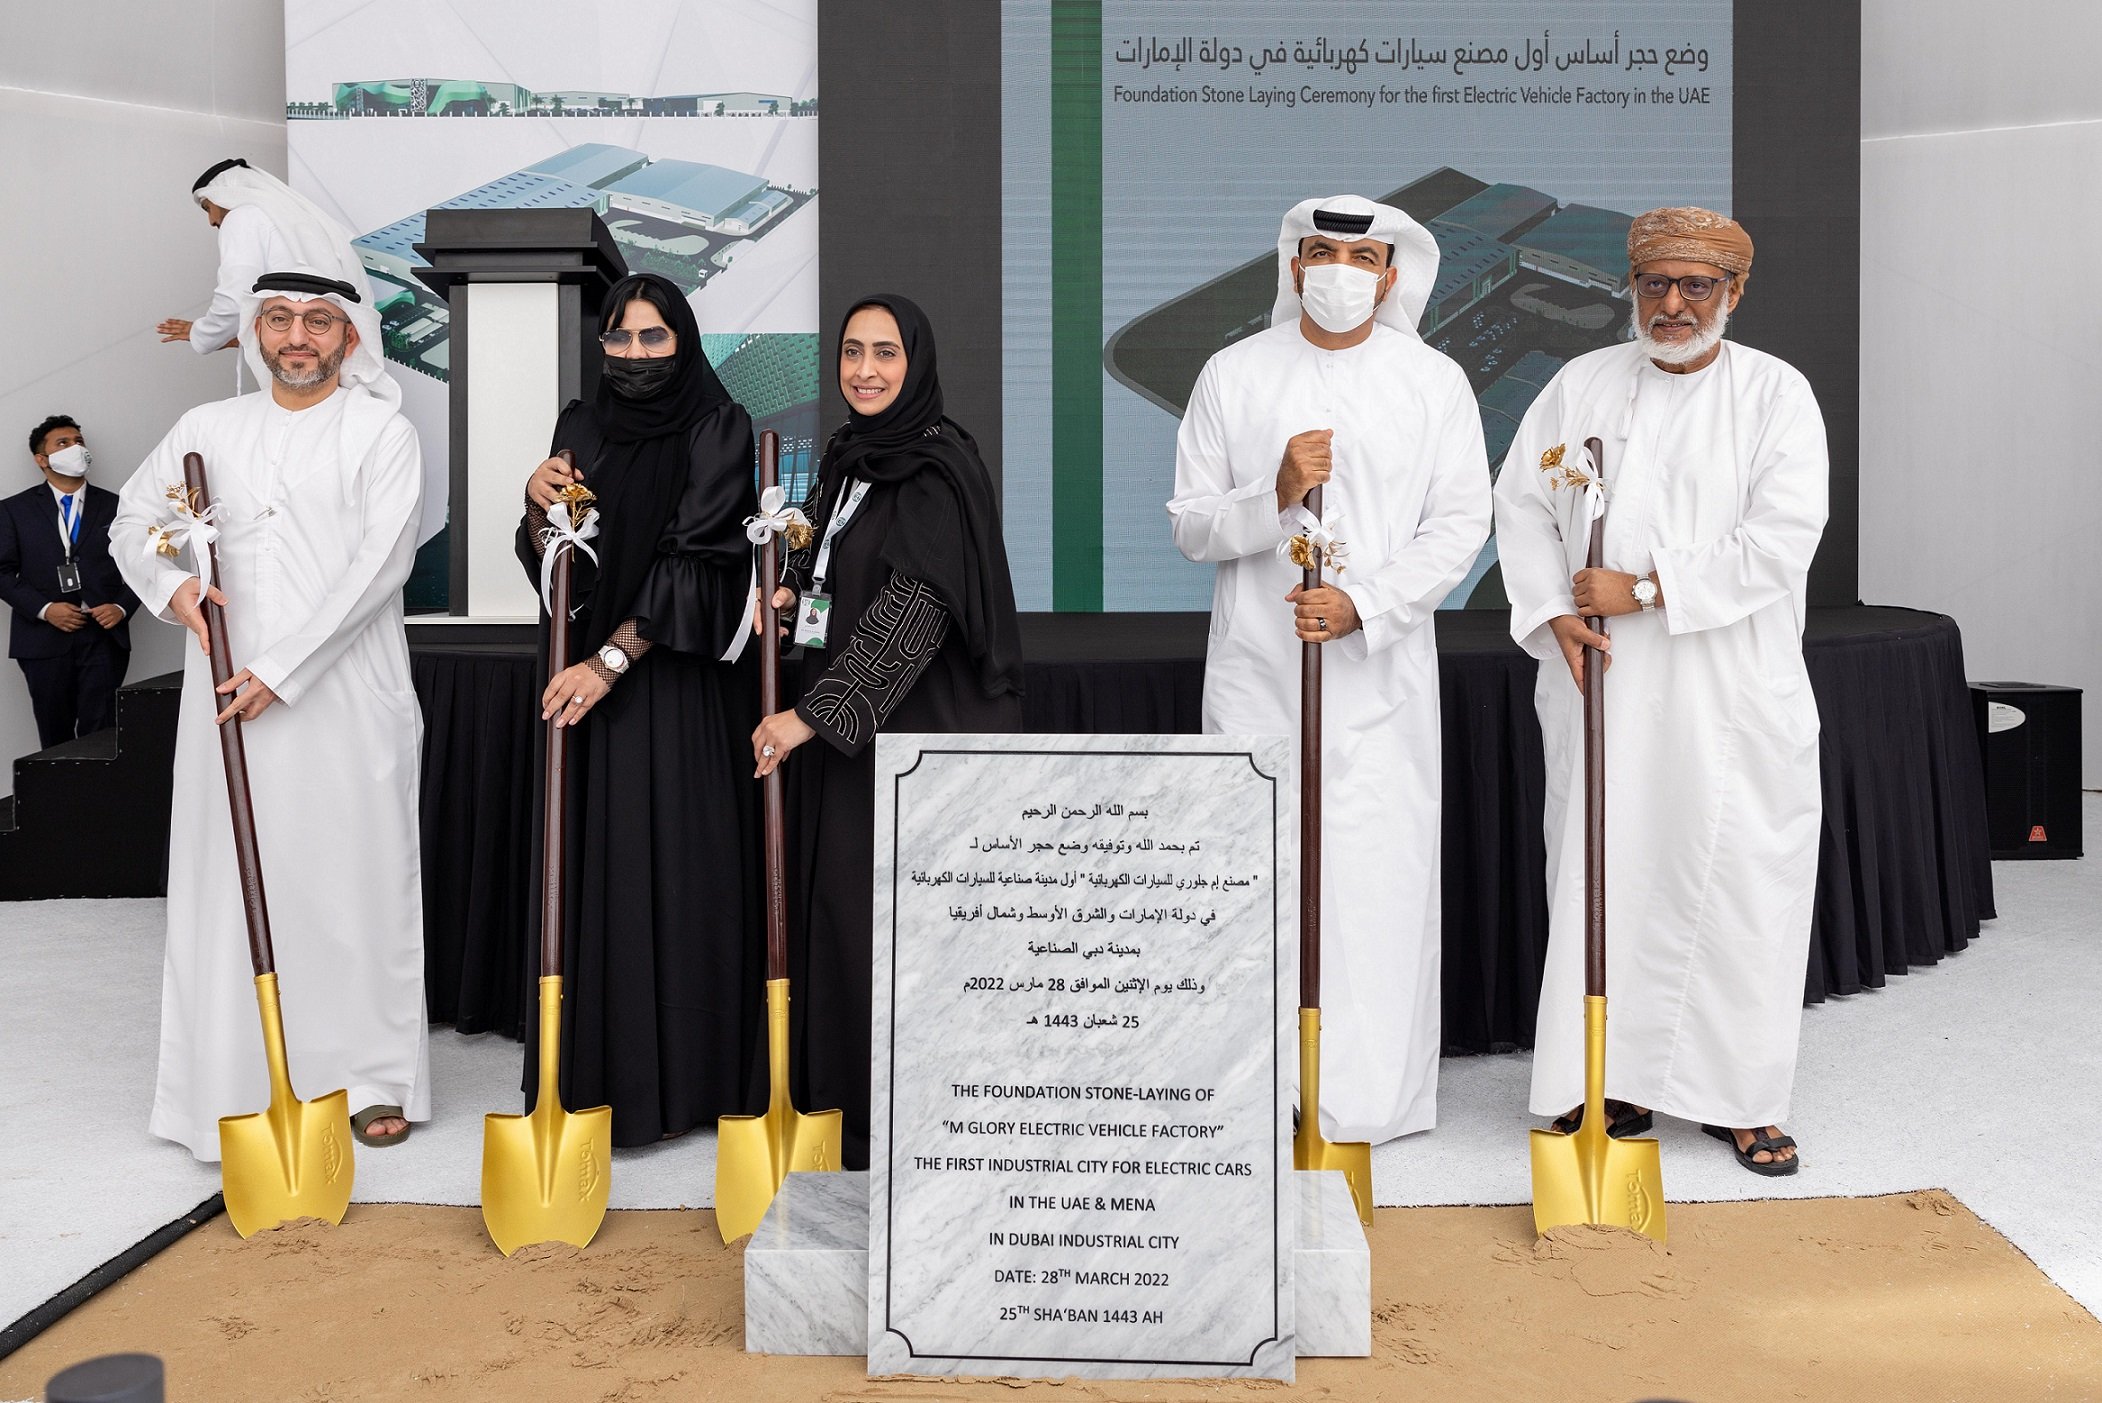 M Glory Group laid the foundation stone at Dubai Industrial City